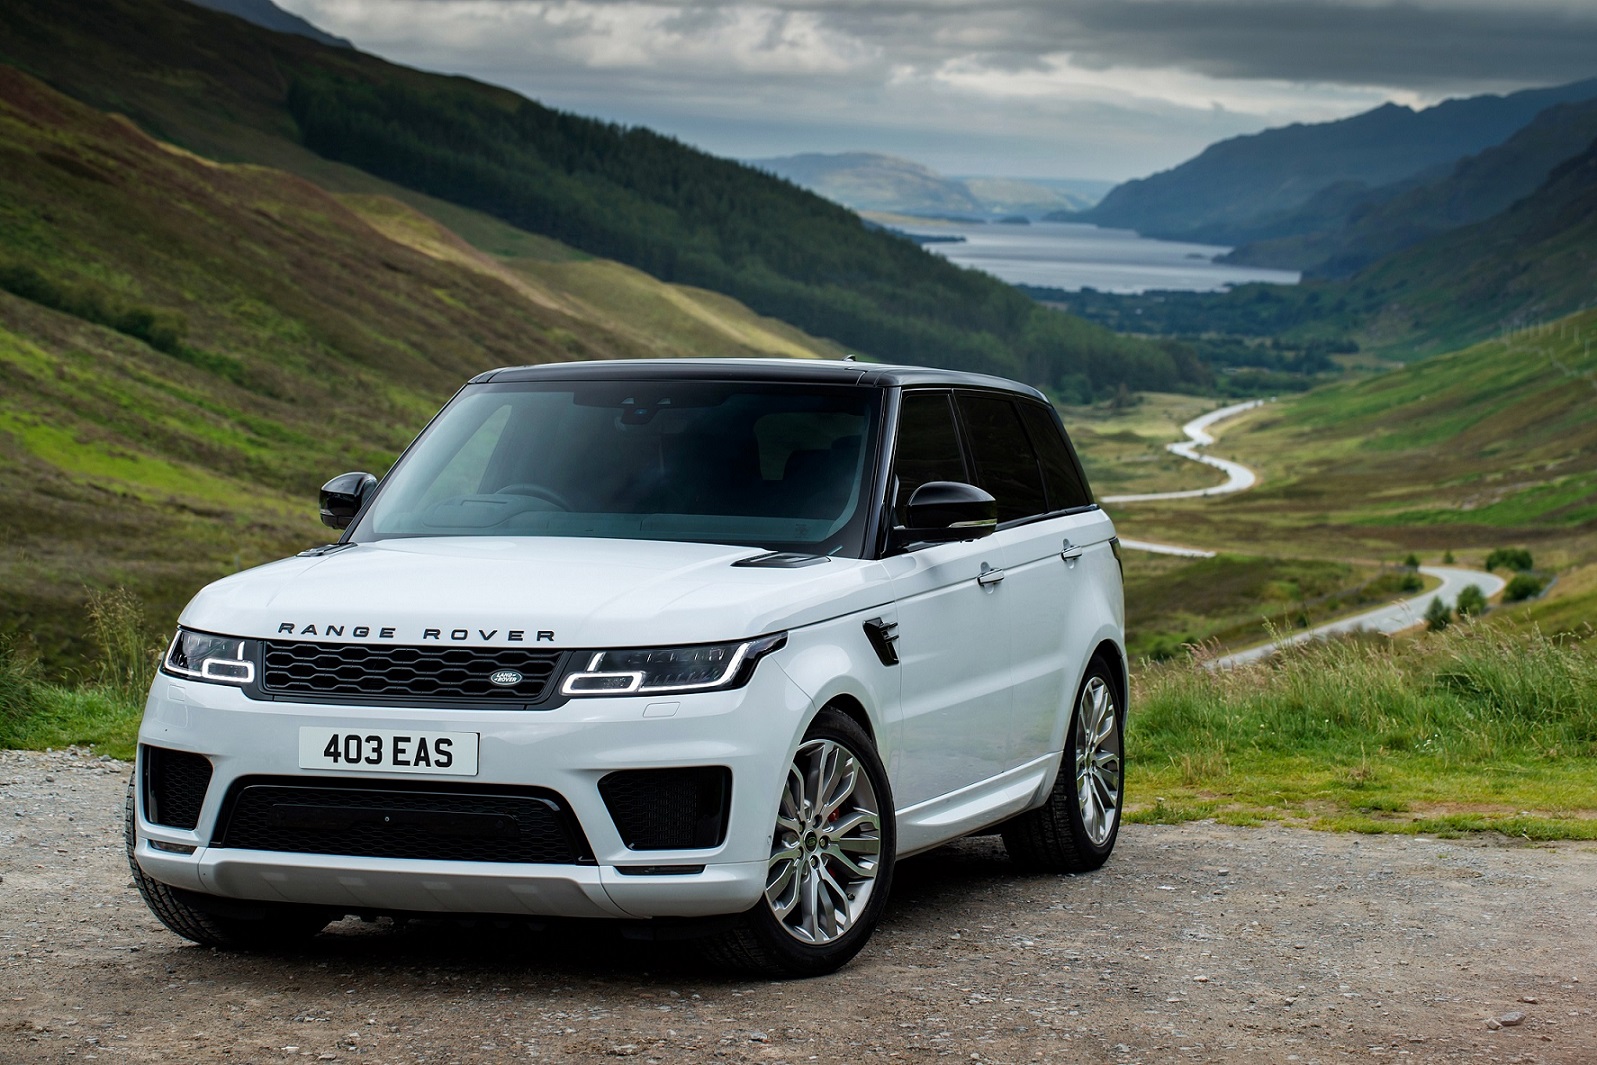 Image for 1.5 Million And Counting: Jaguar Land Rover Celebrates Clean Engine Manufacturing Milestone